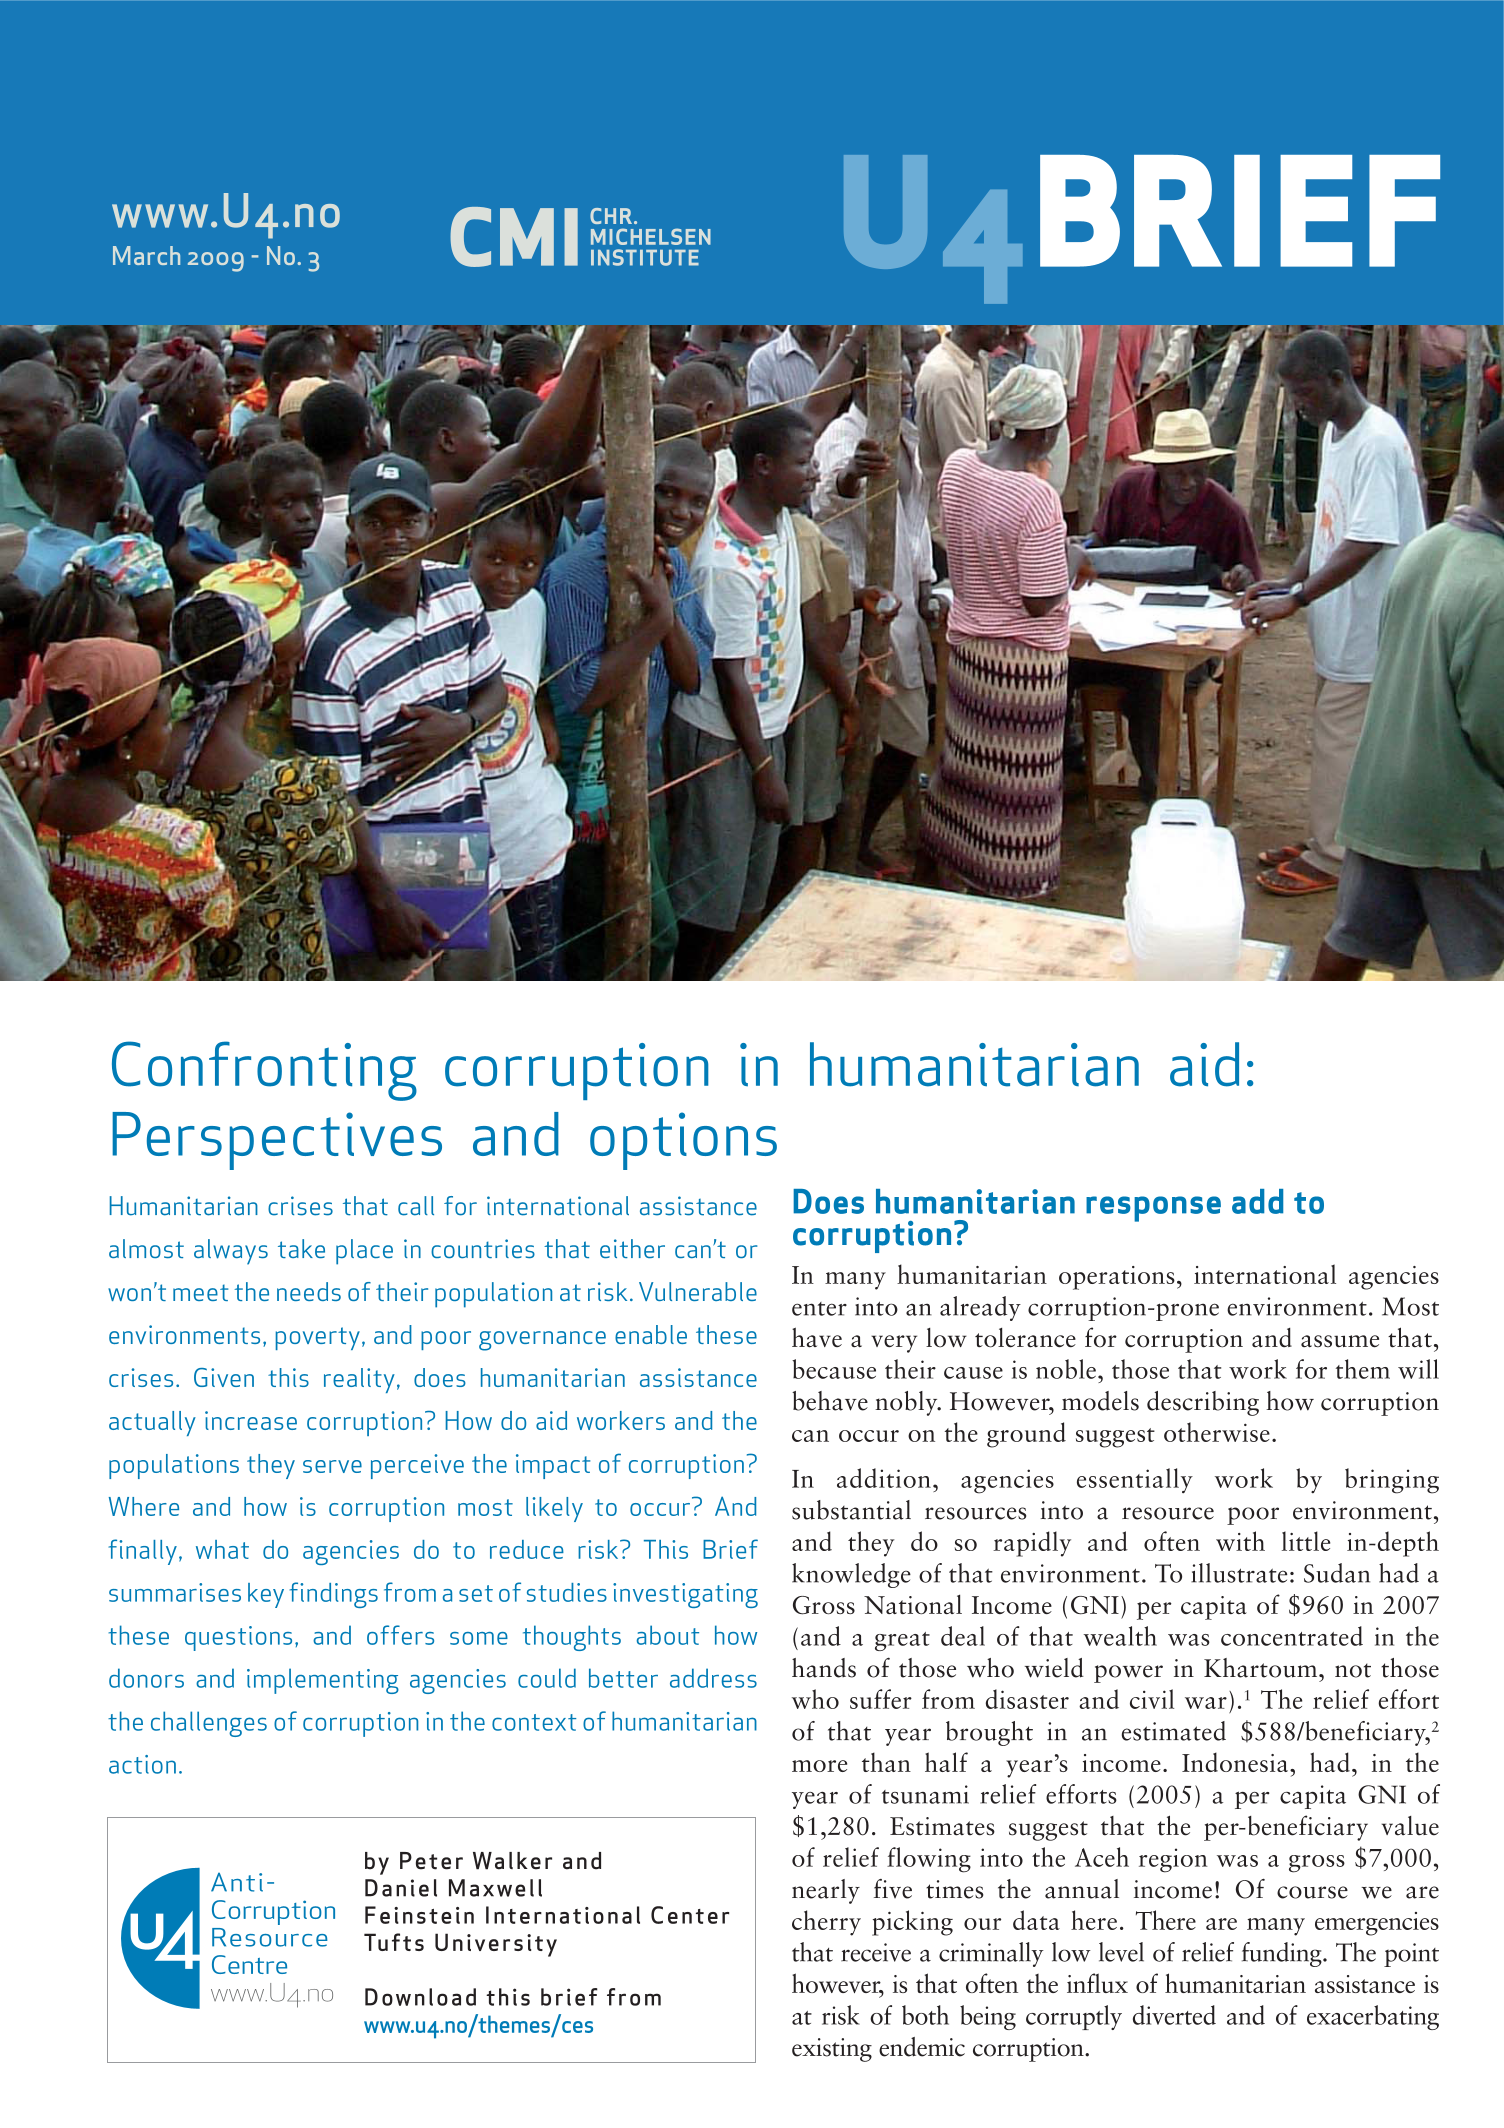 Confronting corruption in humanitarian aid: Perspectives and options